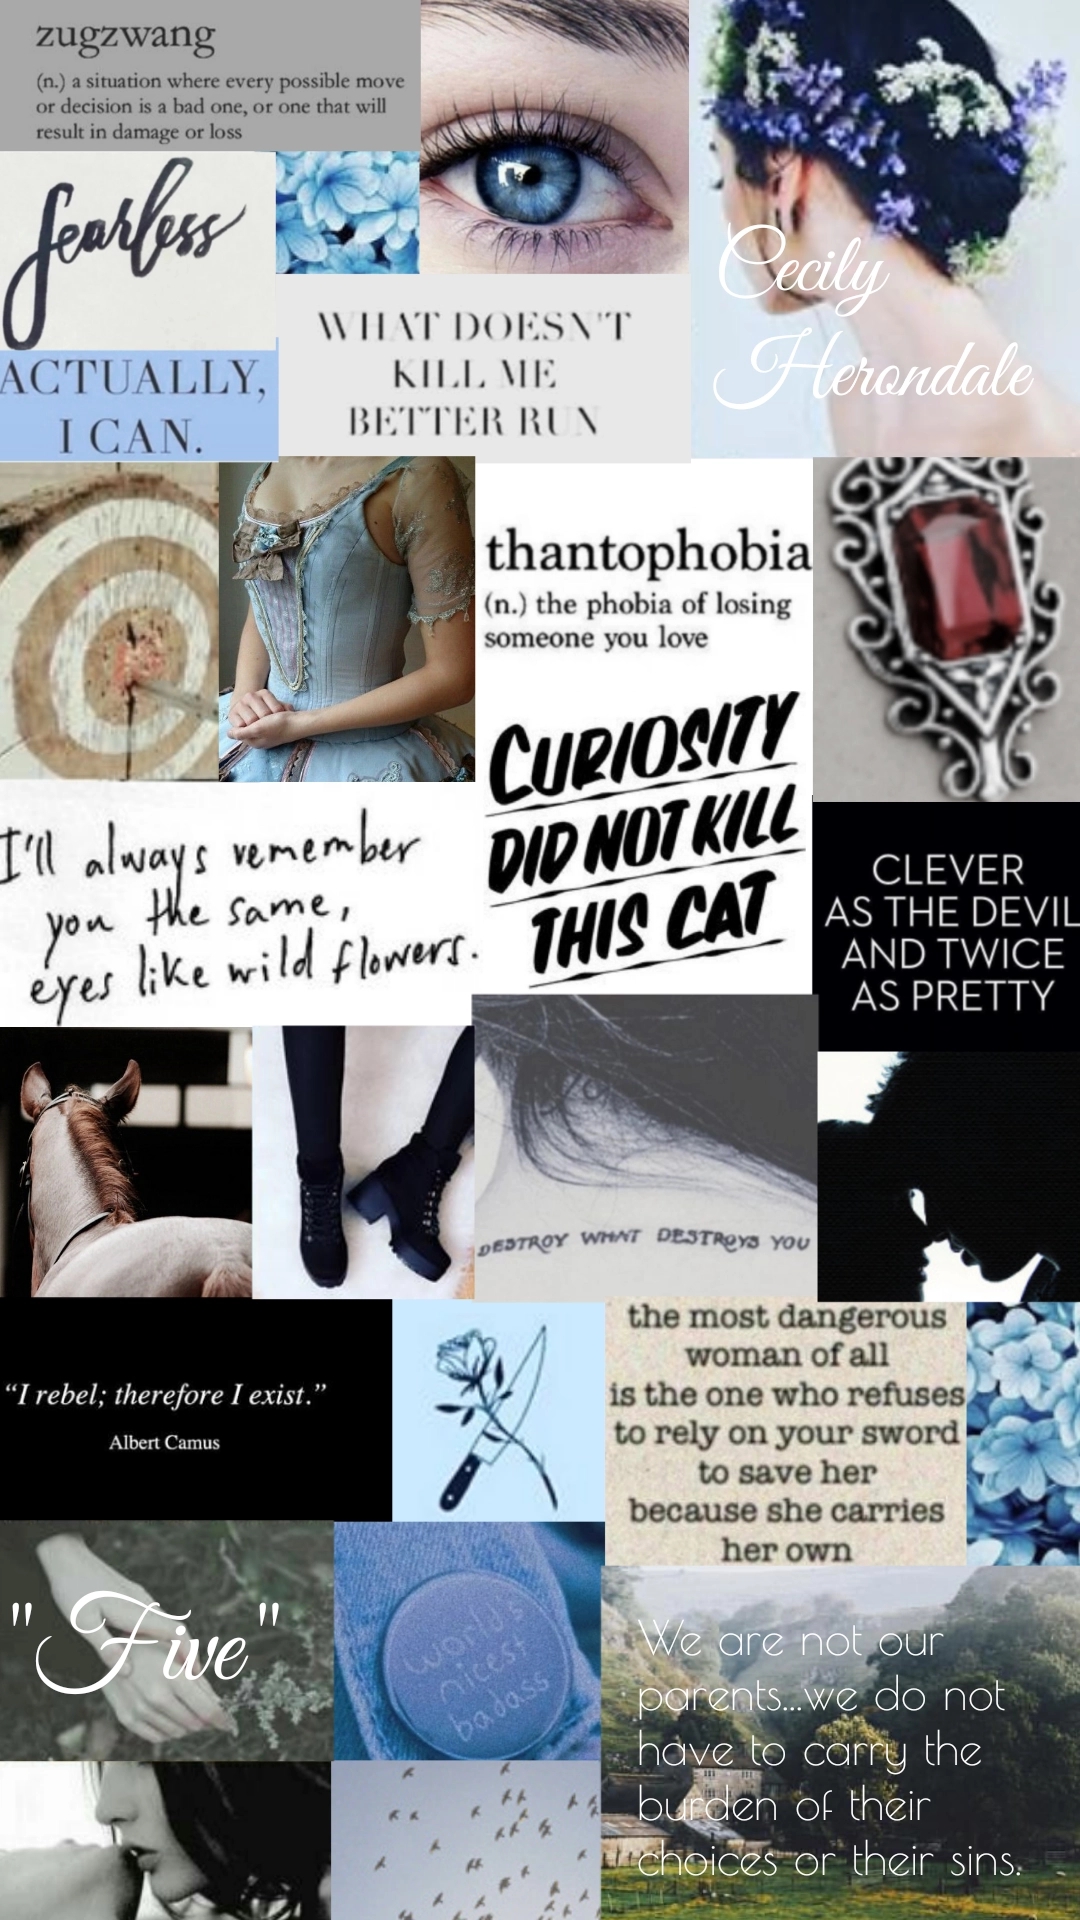 Lady Camille Belcourt aesthetic from The Mortal Instruments